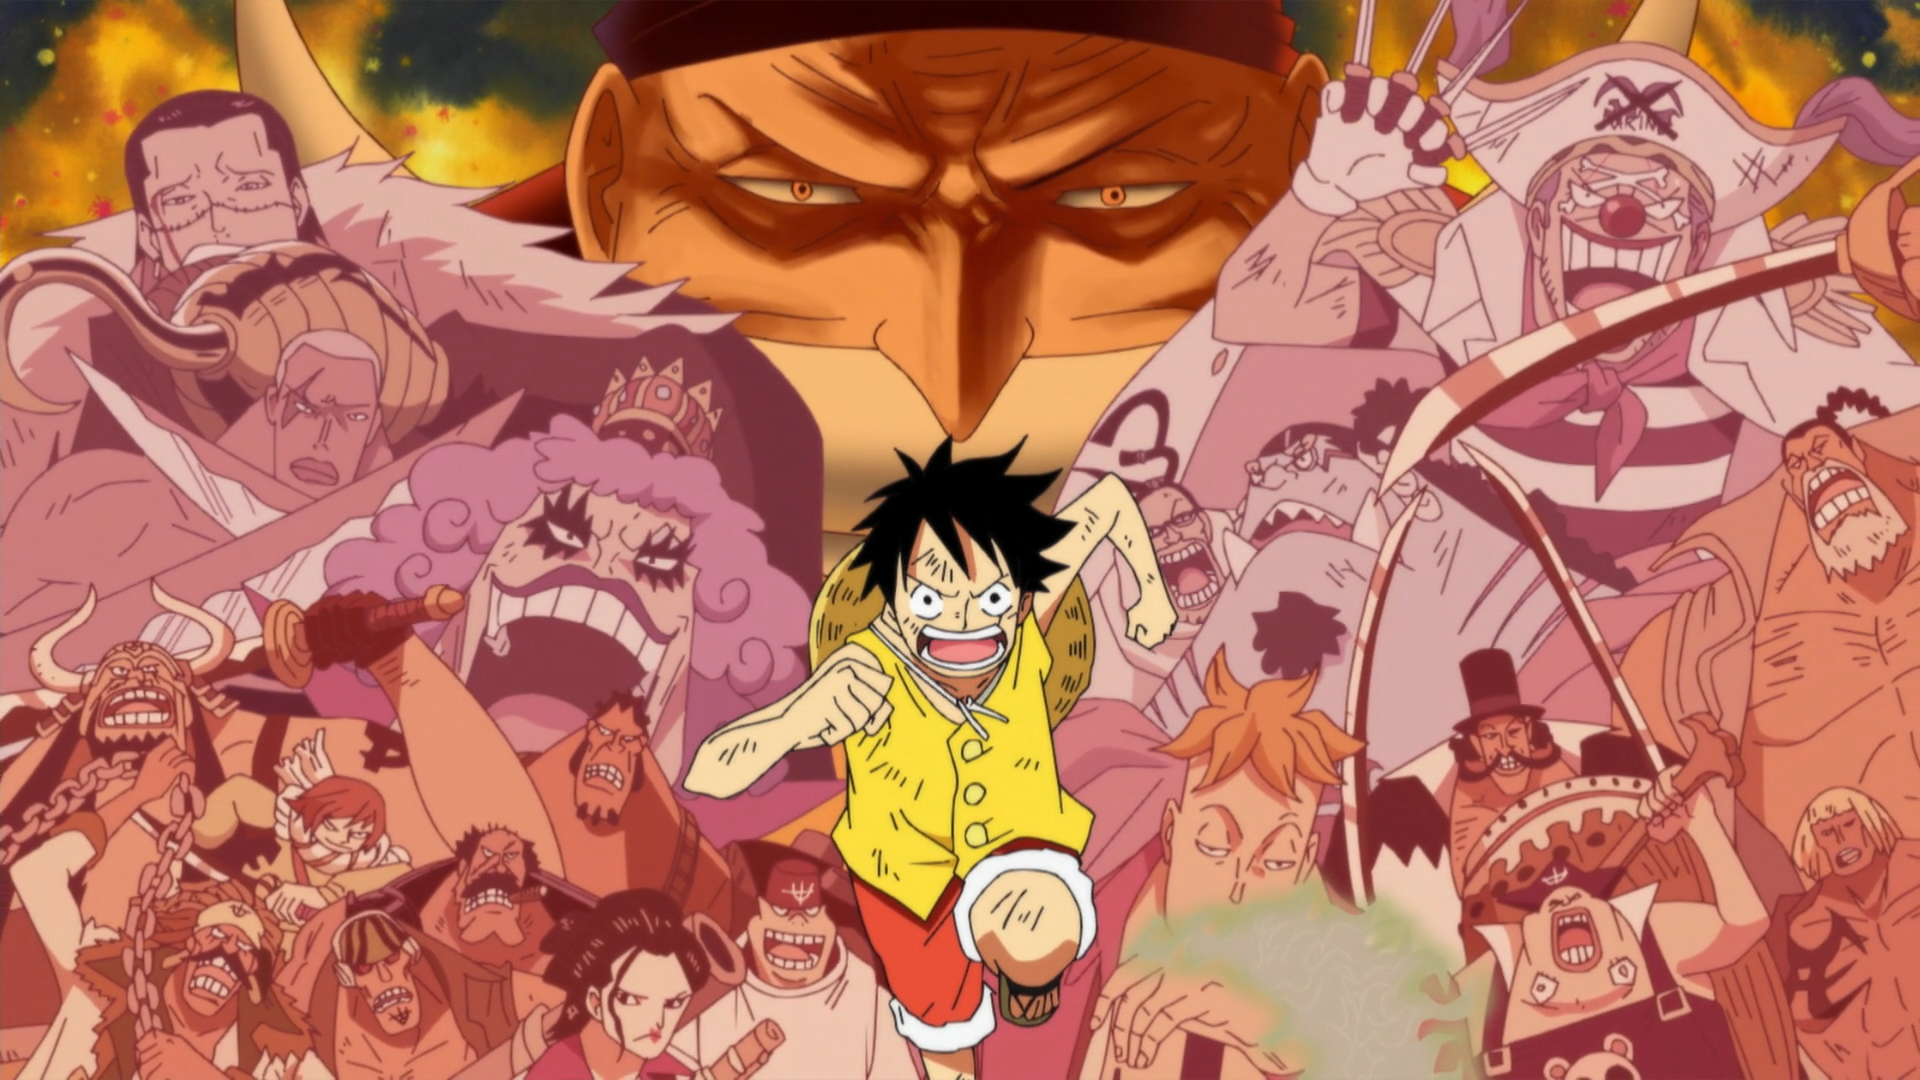 Episode one piece full peperangan di marineford food delivery